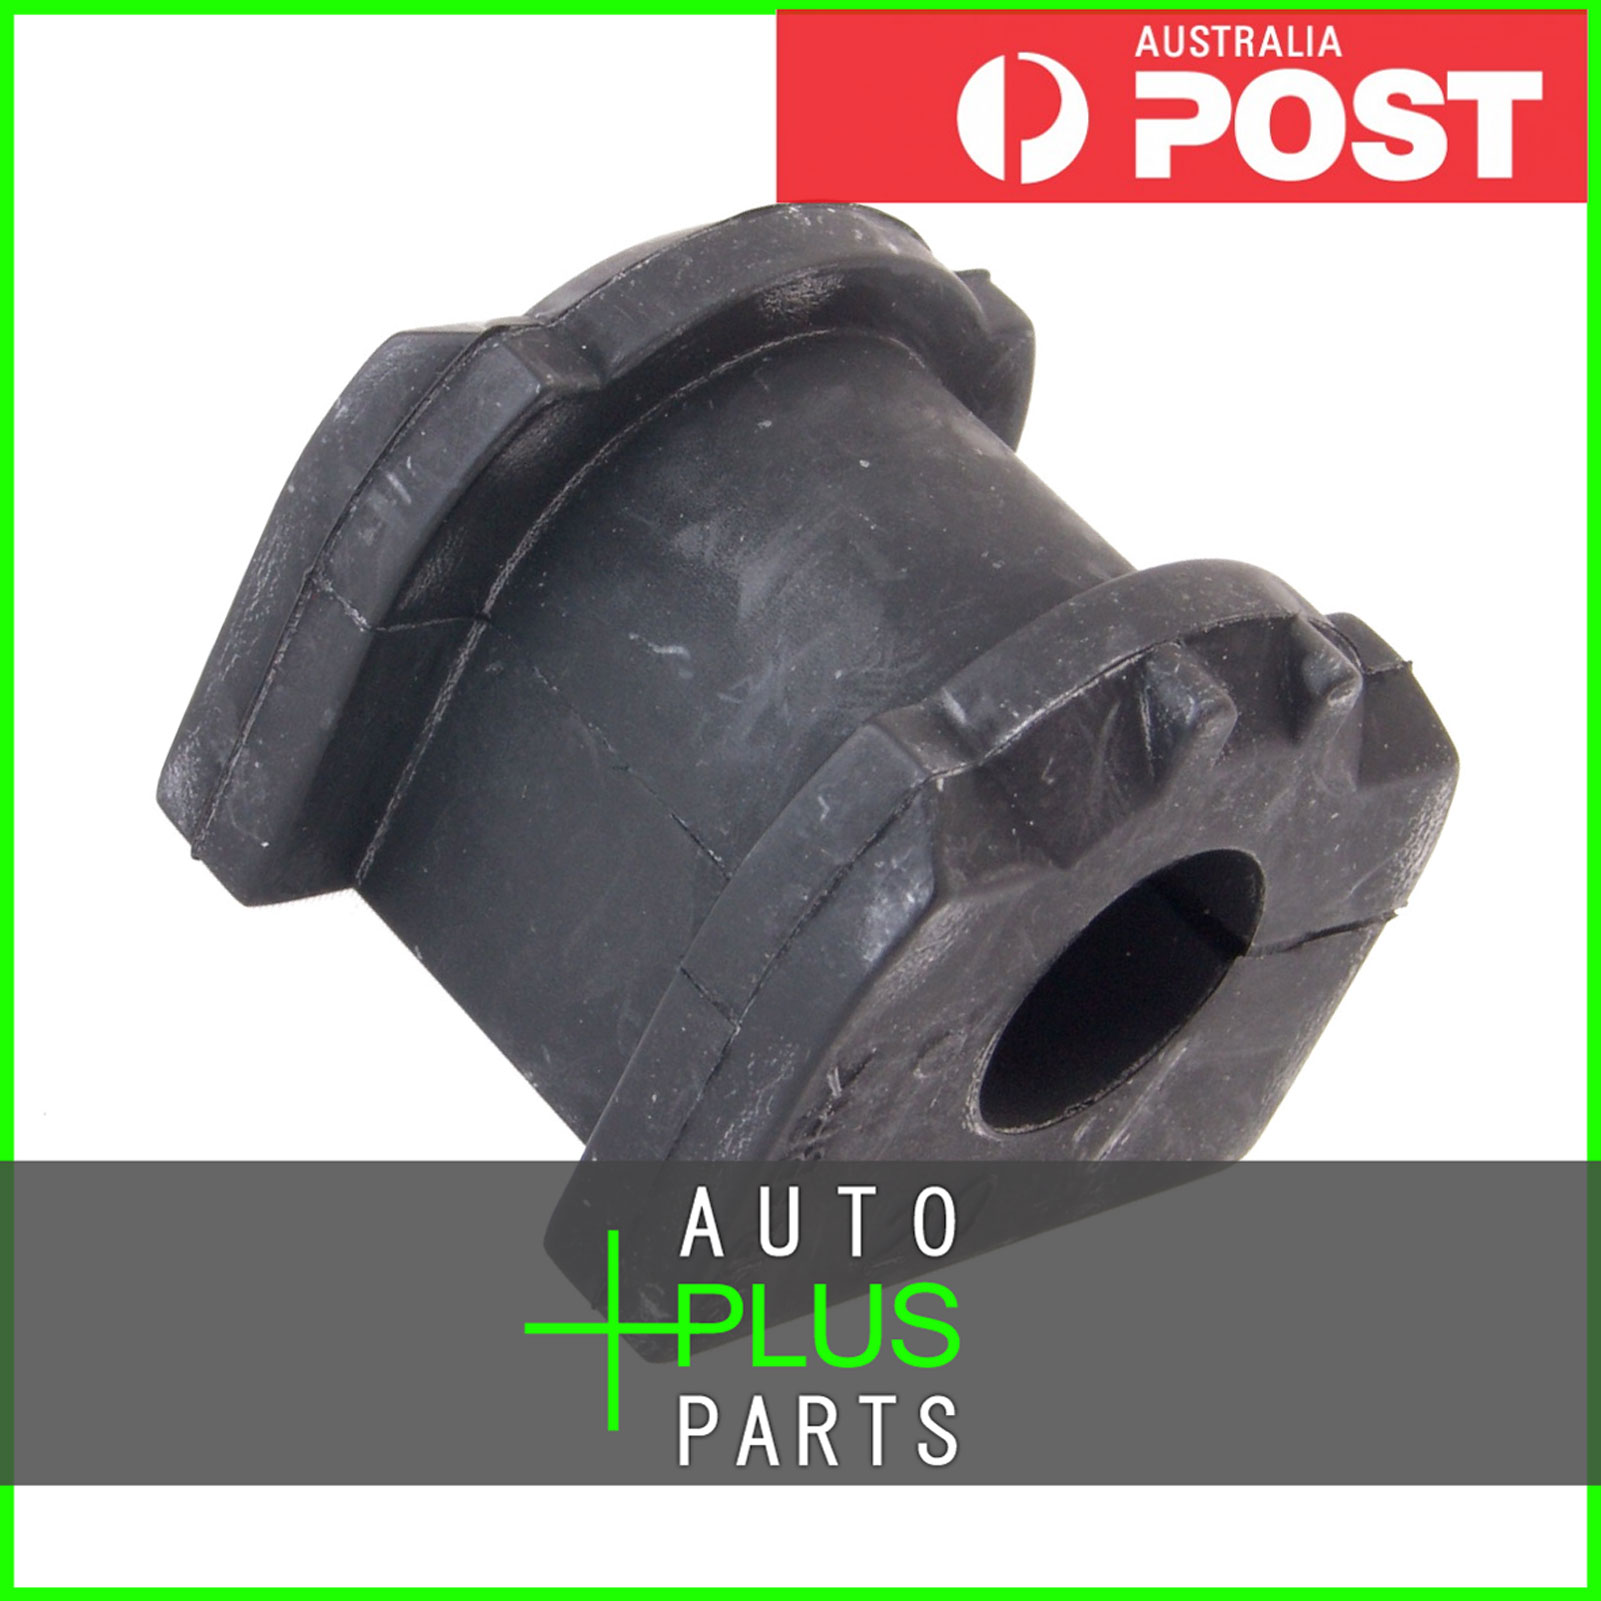 Fits MITSUBISHI LANCER CY 2007-> - Front Stabilizer Bush 20mm Product Photo